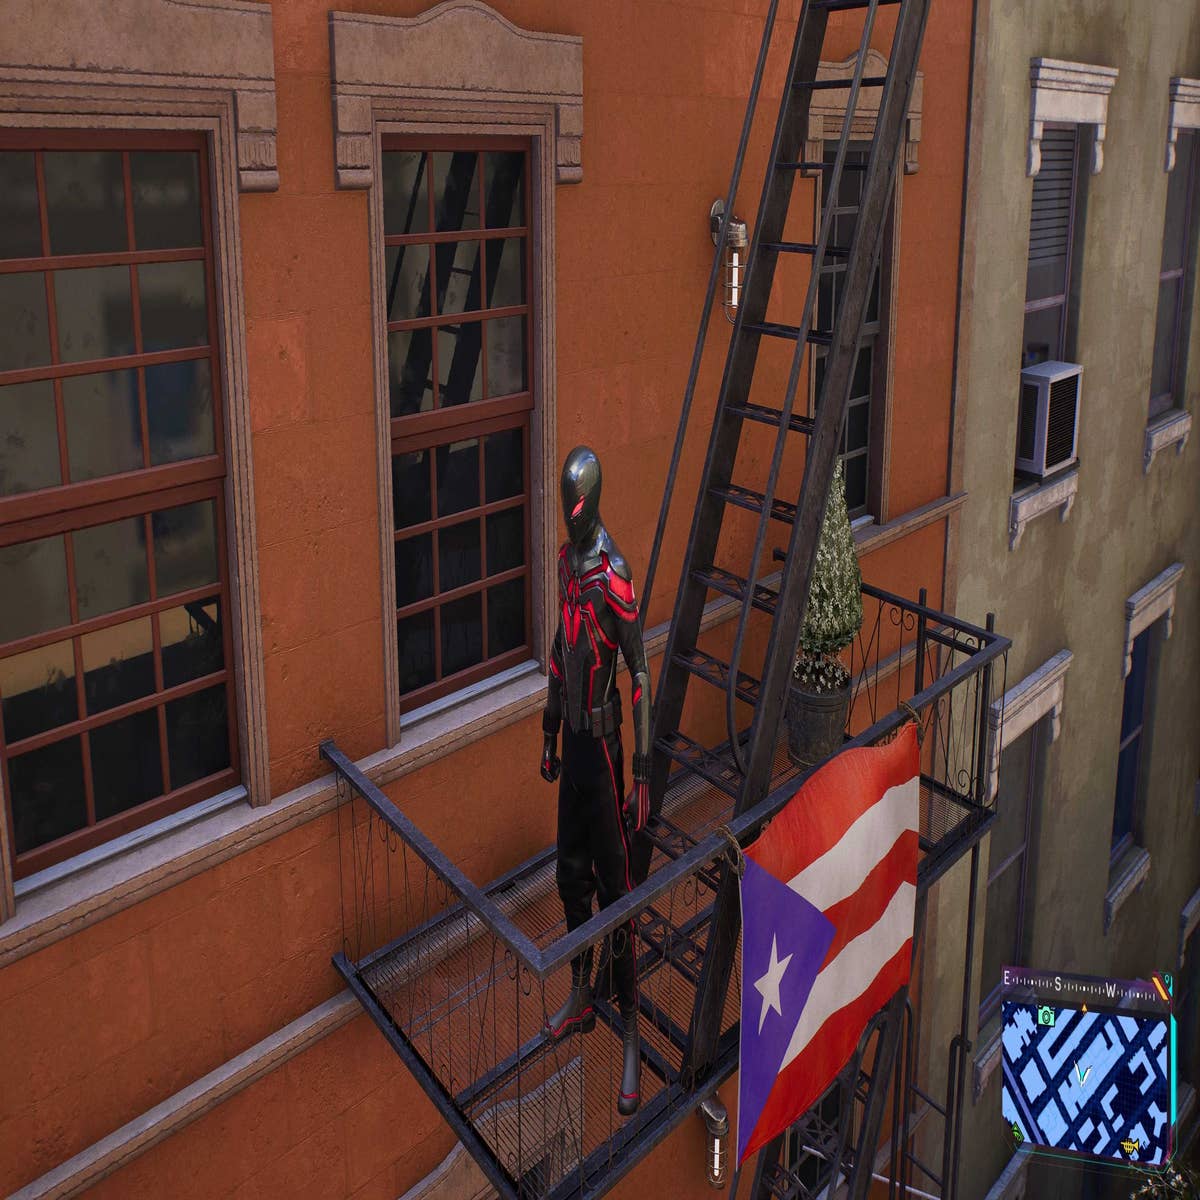 Insomniac Games promises to fix wrong flag use in Marvel's Spider